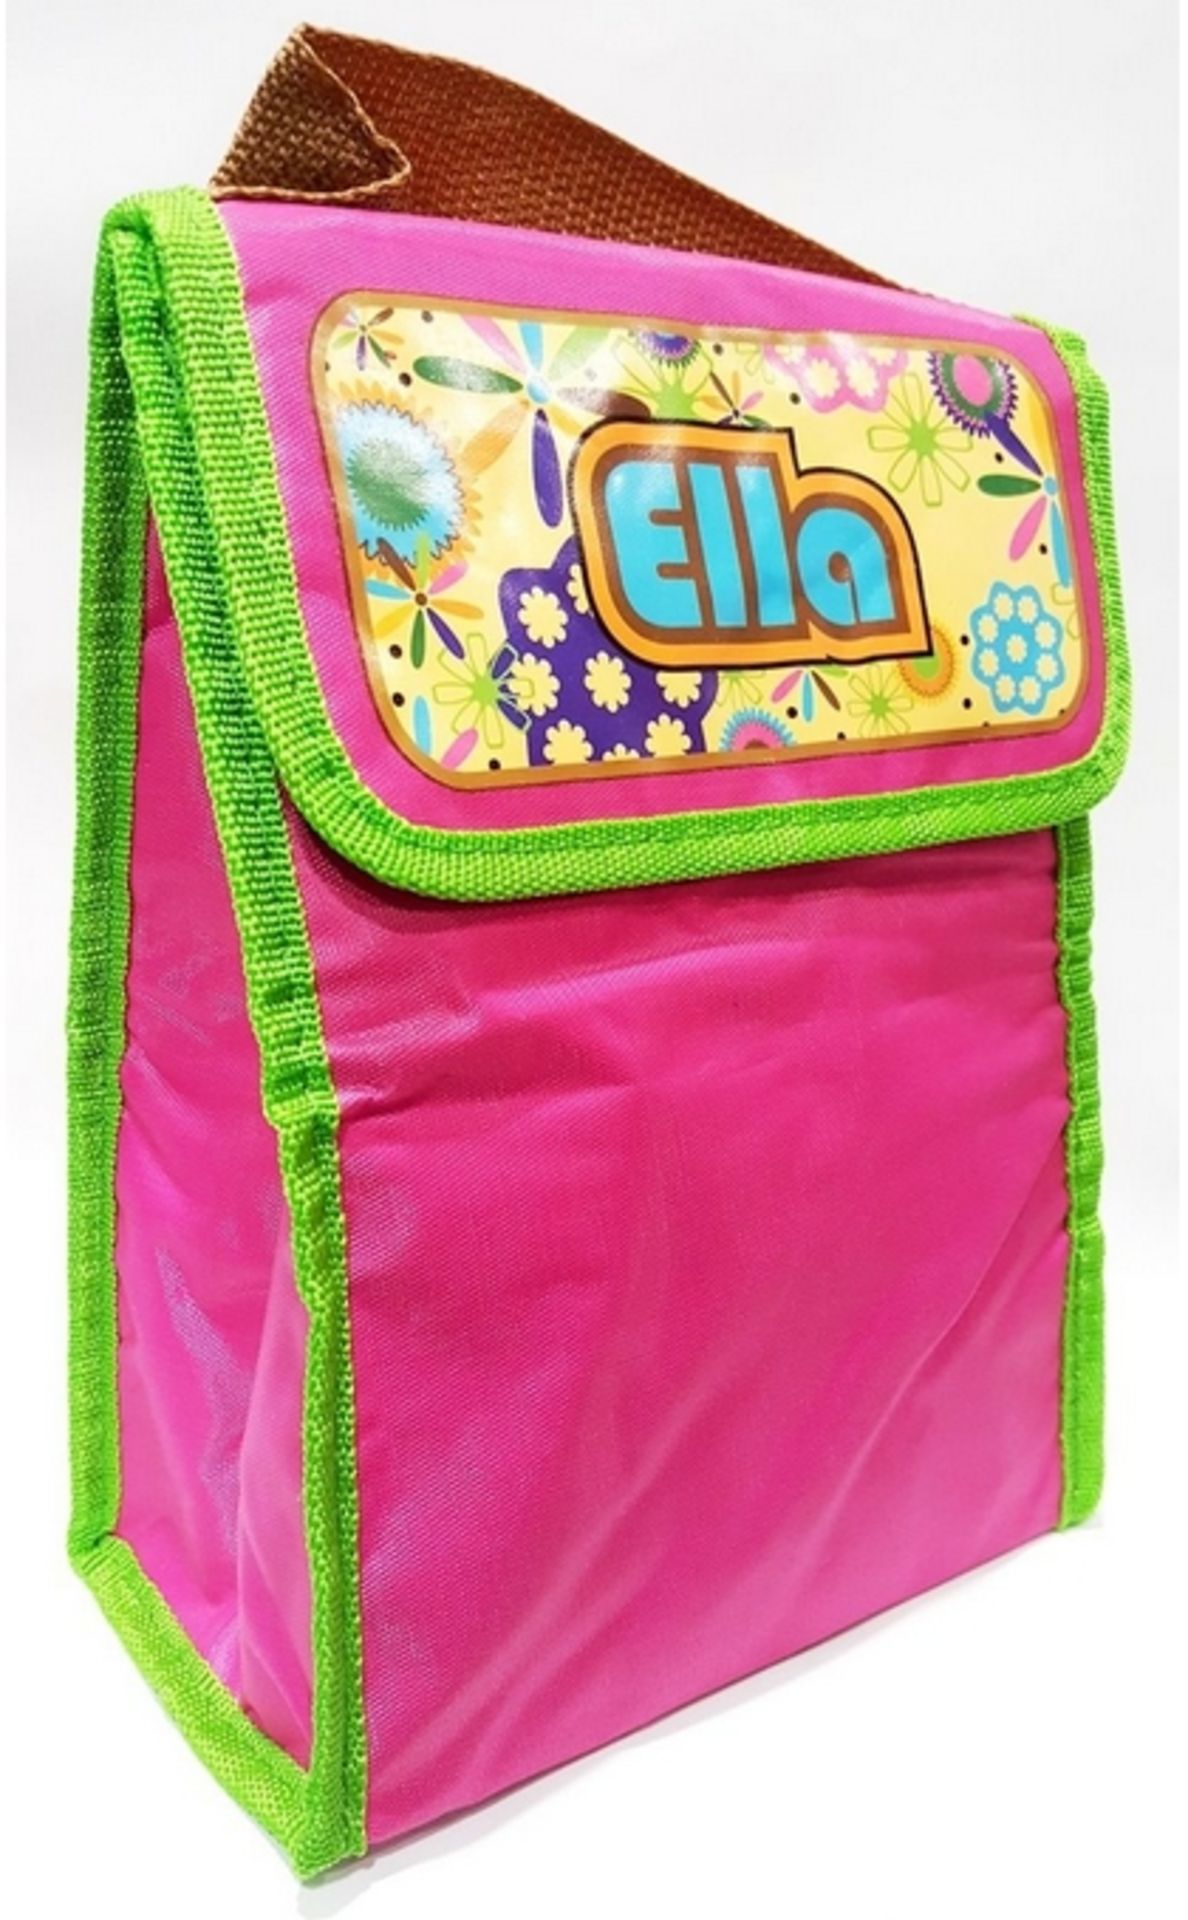 40 Randomly Picked From 100S Children's Insulated Lunch Bags. - Image 6 of 6